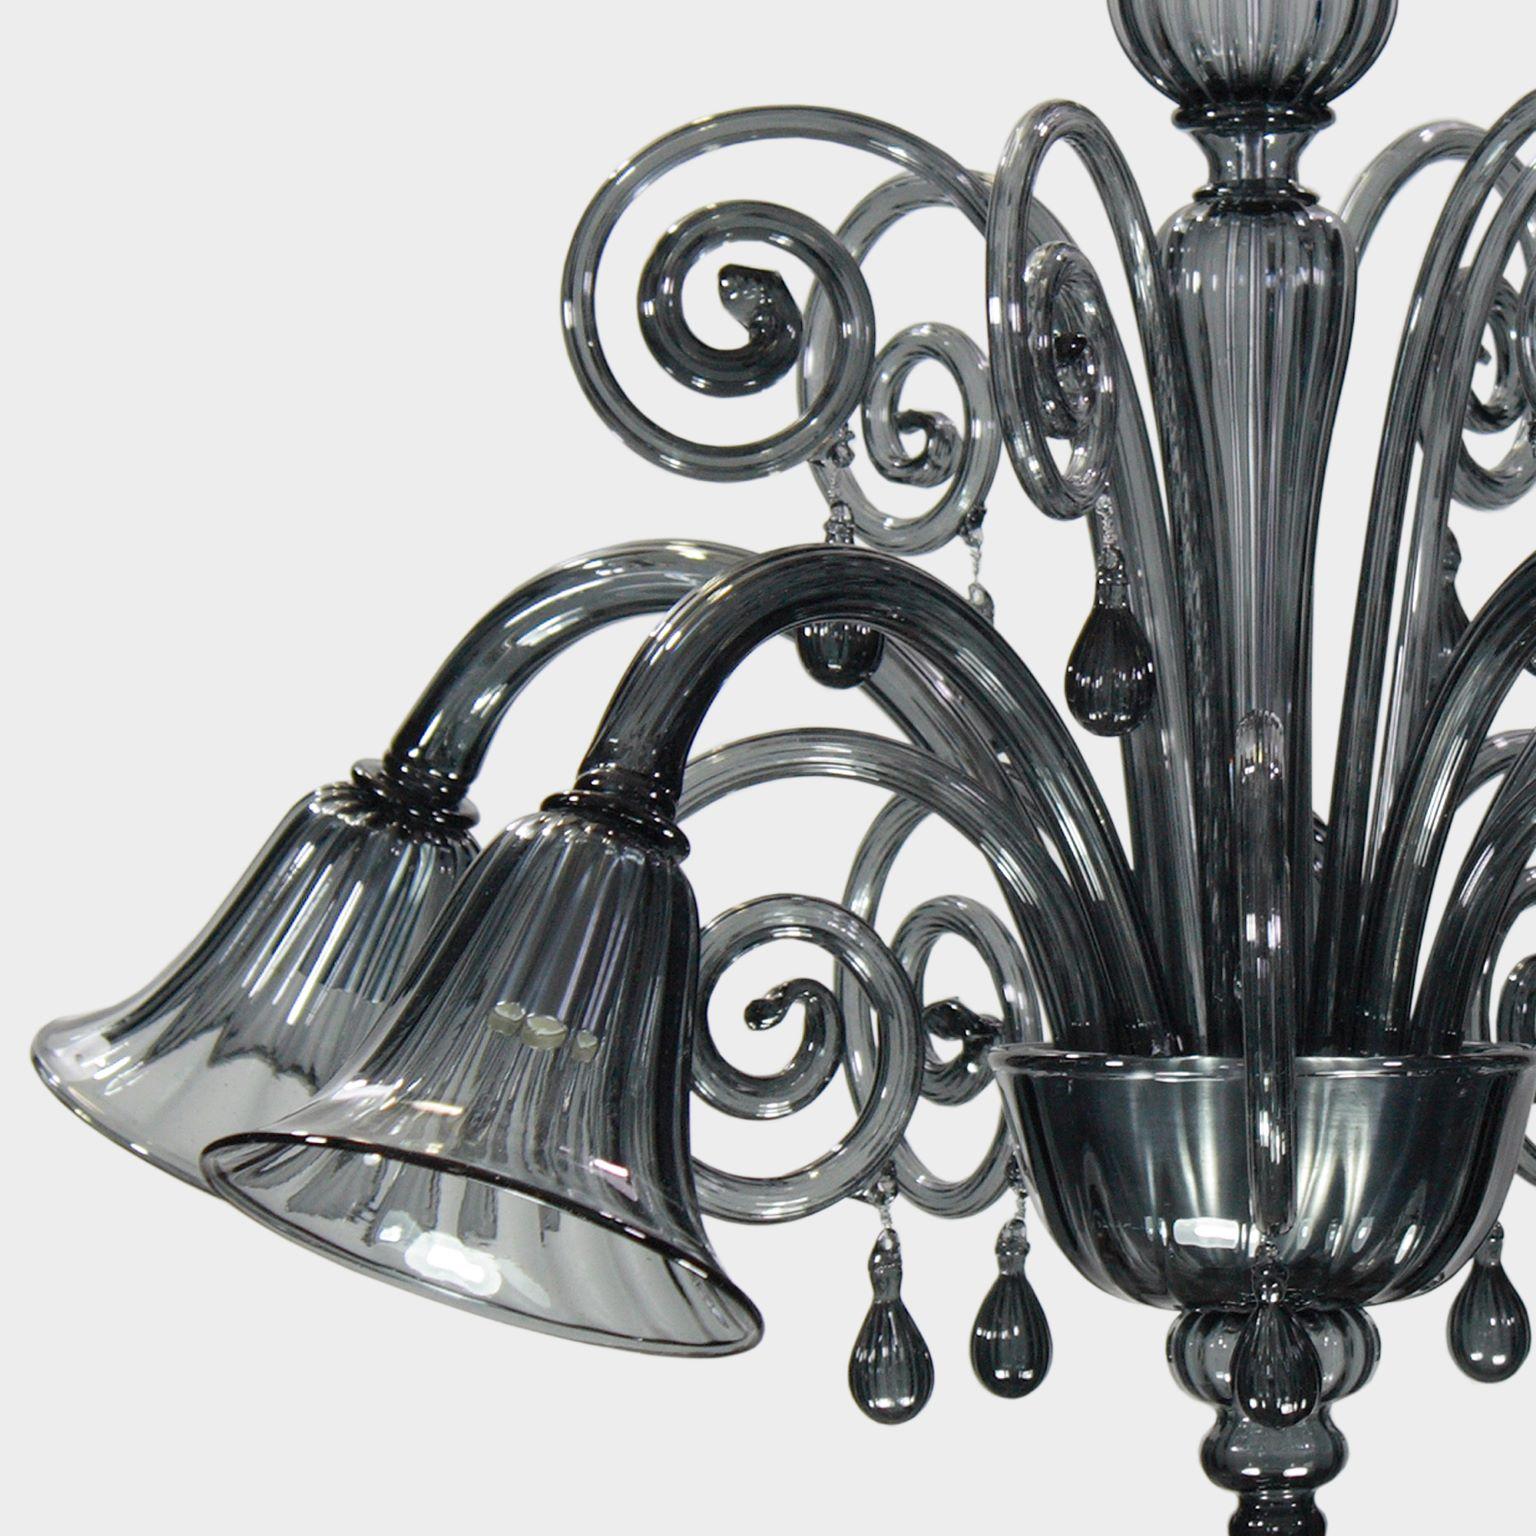 This venetian glass chandelier is in dark grey murano glass has glass pastorals and pendants. The lights are downwards and the main glass parts are realised with the rigadin style.
It is characterized by a romantic and delicate shape. The stem is